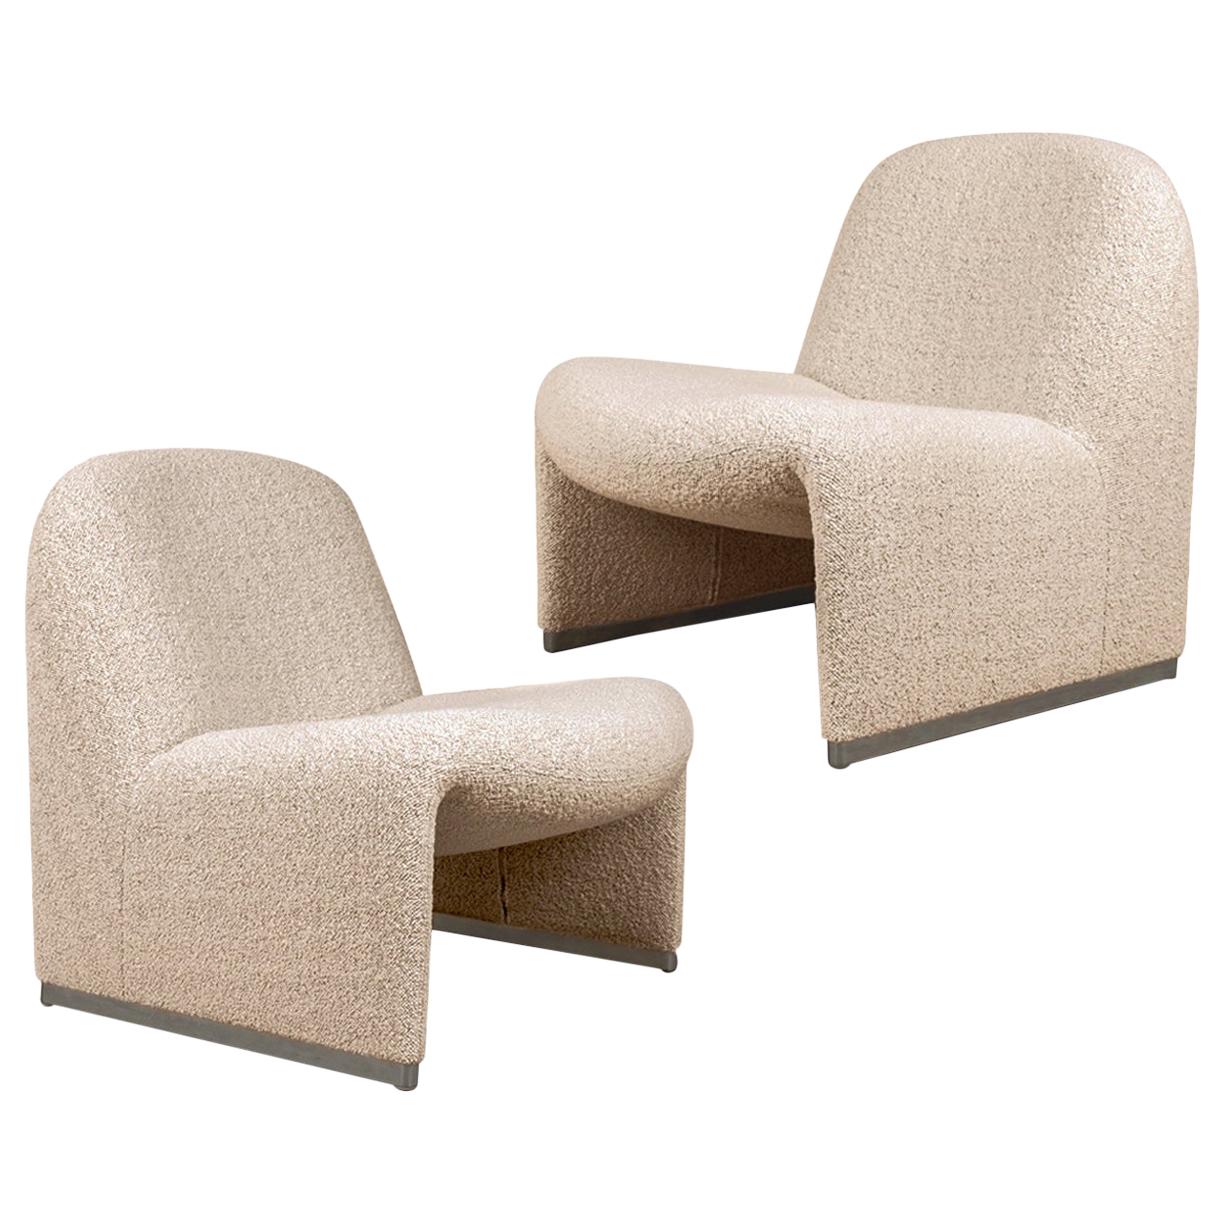 One 'Alky' Chair by G. Piretti for Castelli New Upholstery Boucle by Dedar